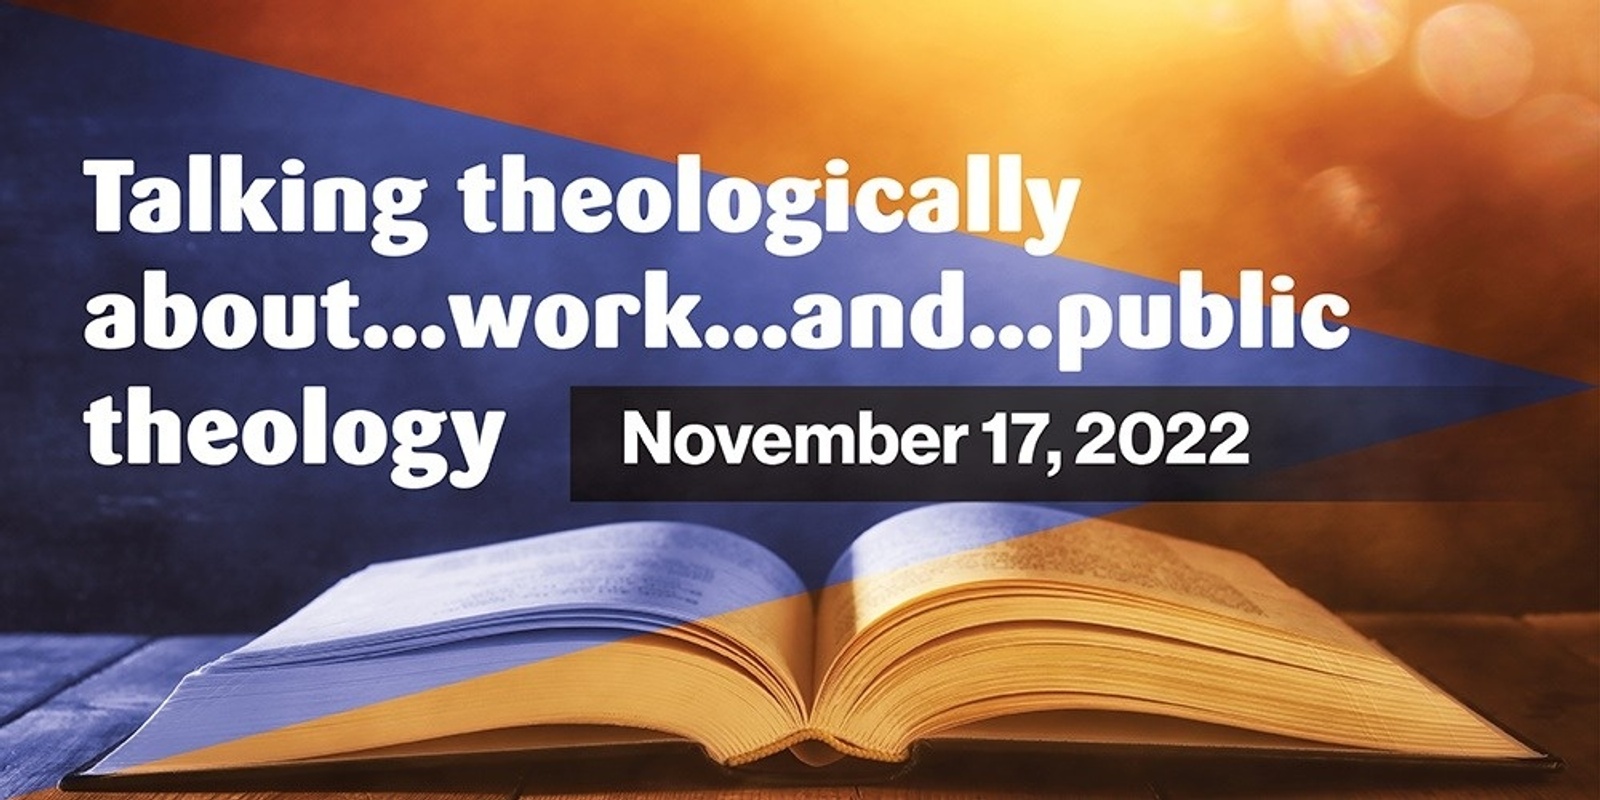 Banner image for Talking theologically about...work...and public theology